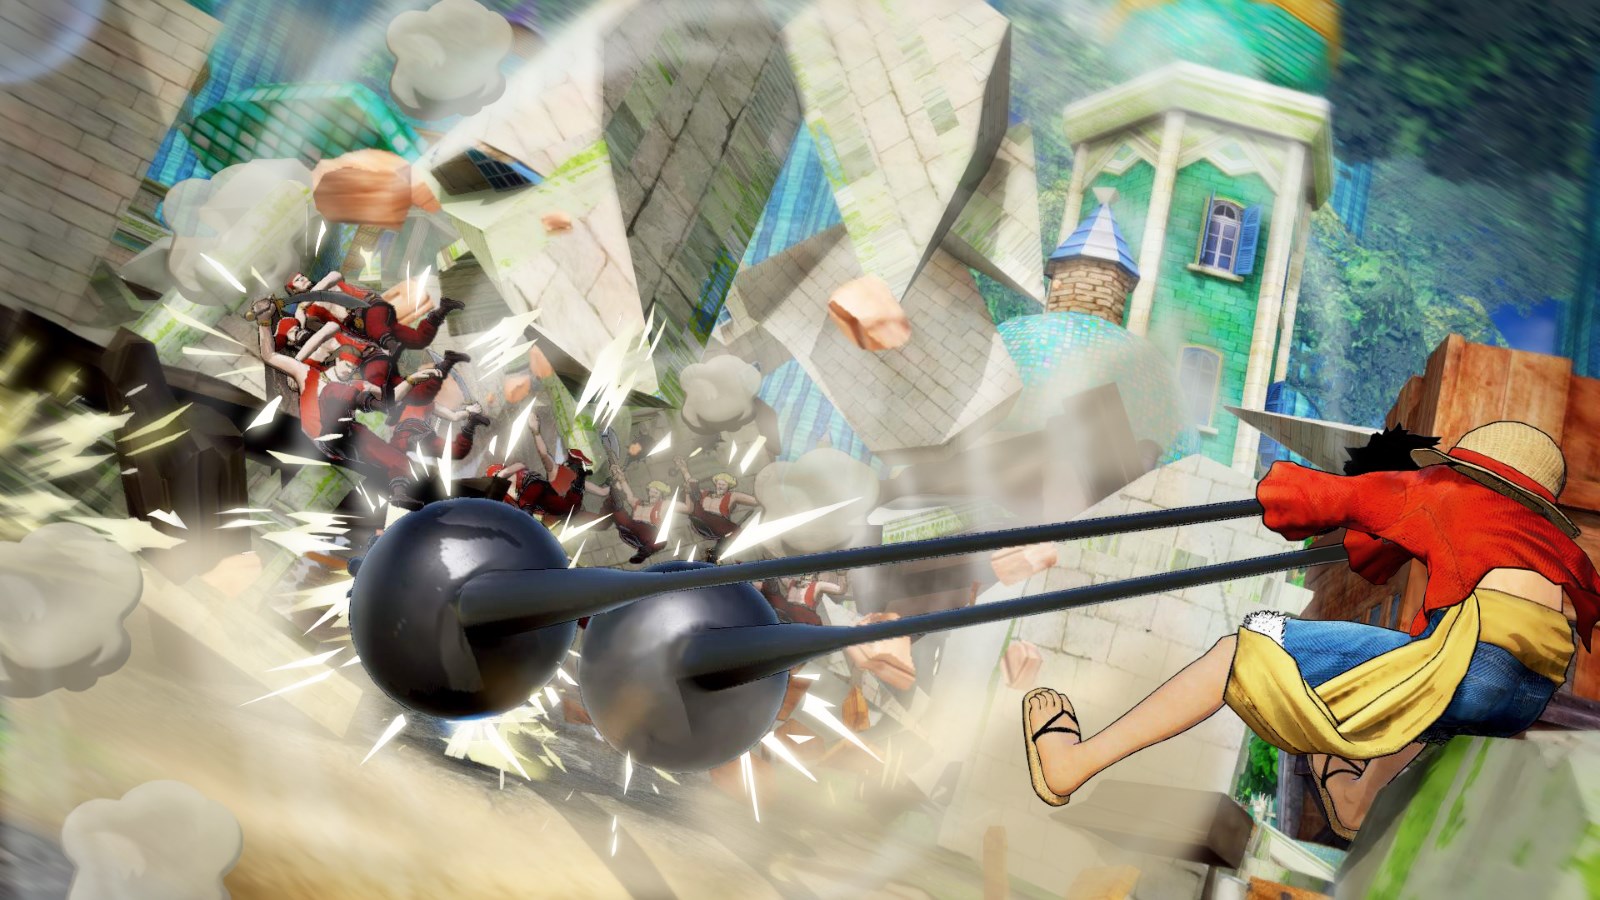 One Piece Pirate Warriors 4 Screenshot Showing Luffy Expanding His Arms Into Wrecking Balls to Knock Out a Bunch of Enemies while Destroying Part of a Castle Building